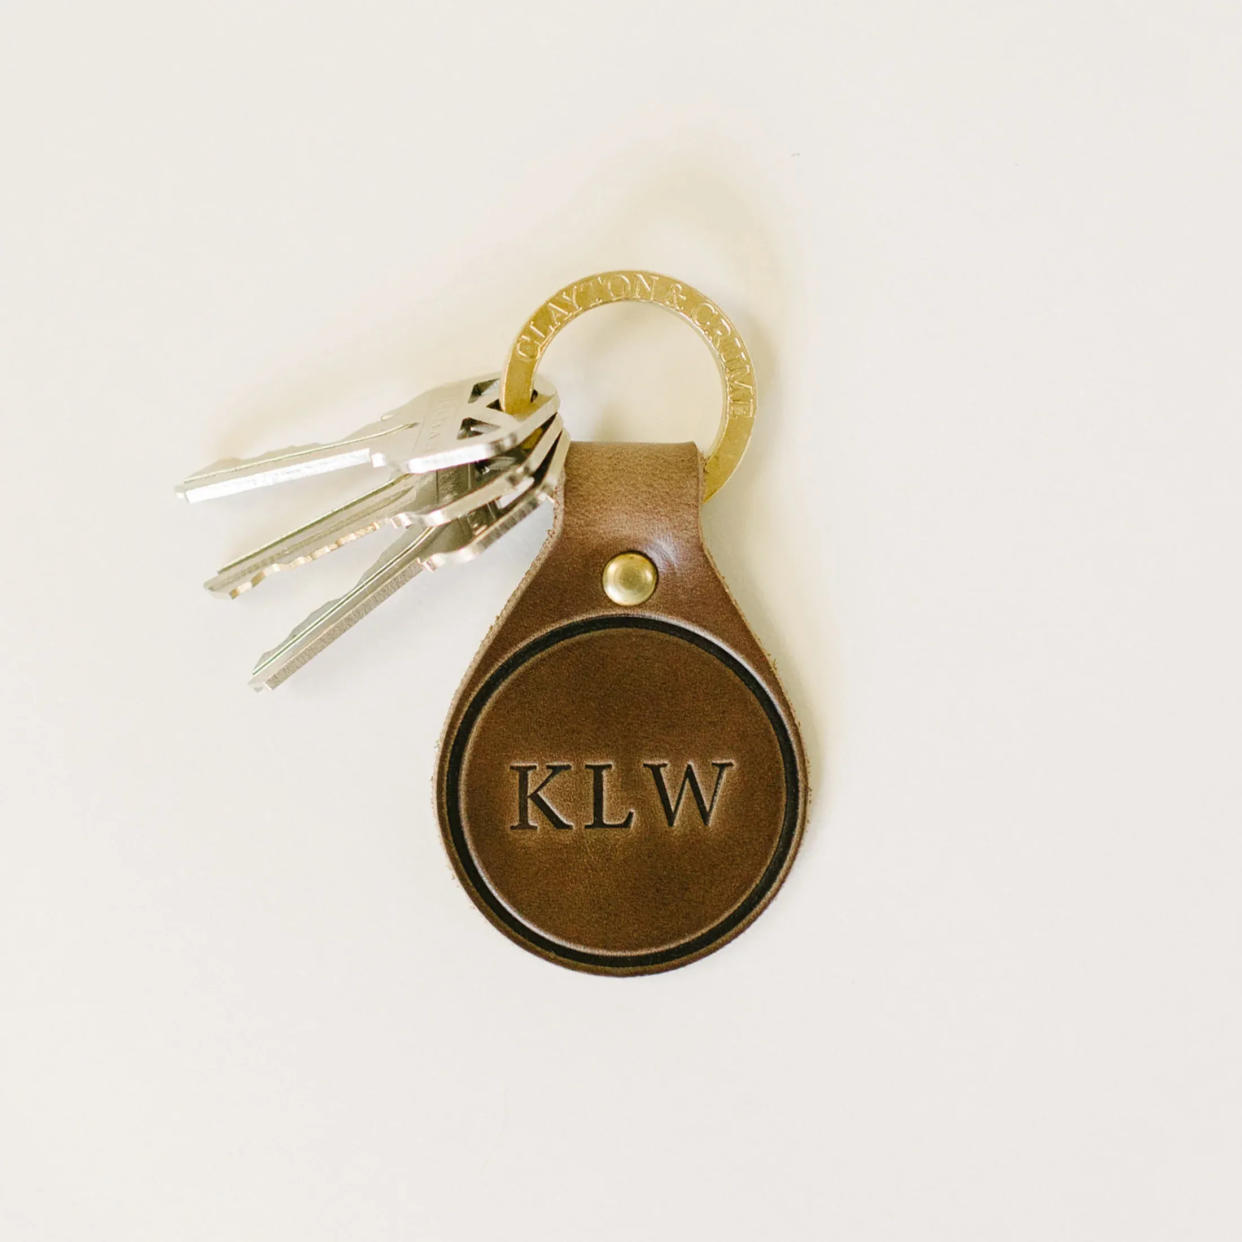 Leather key fob, available at Clayton & Crume. $30